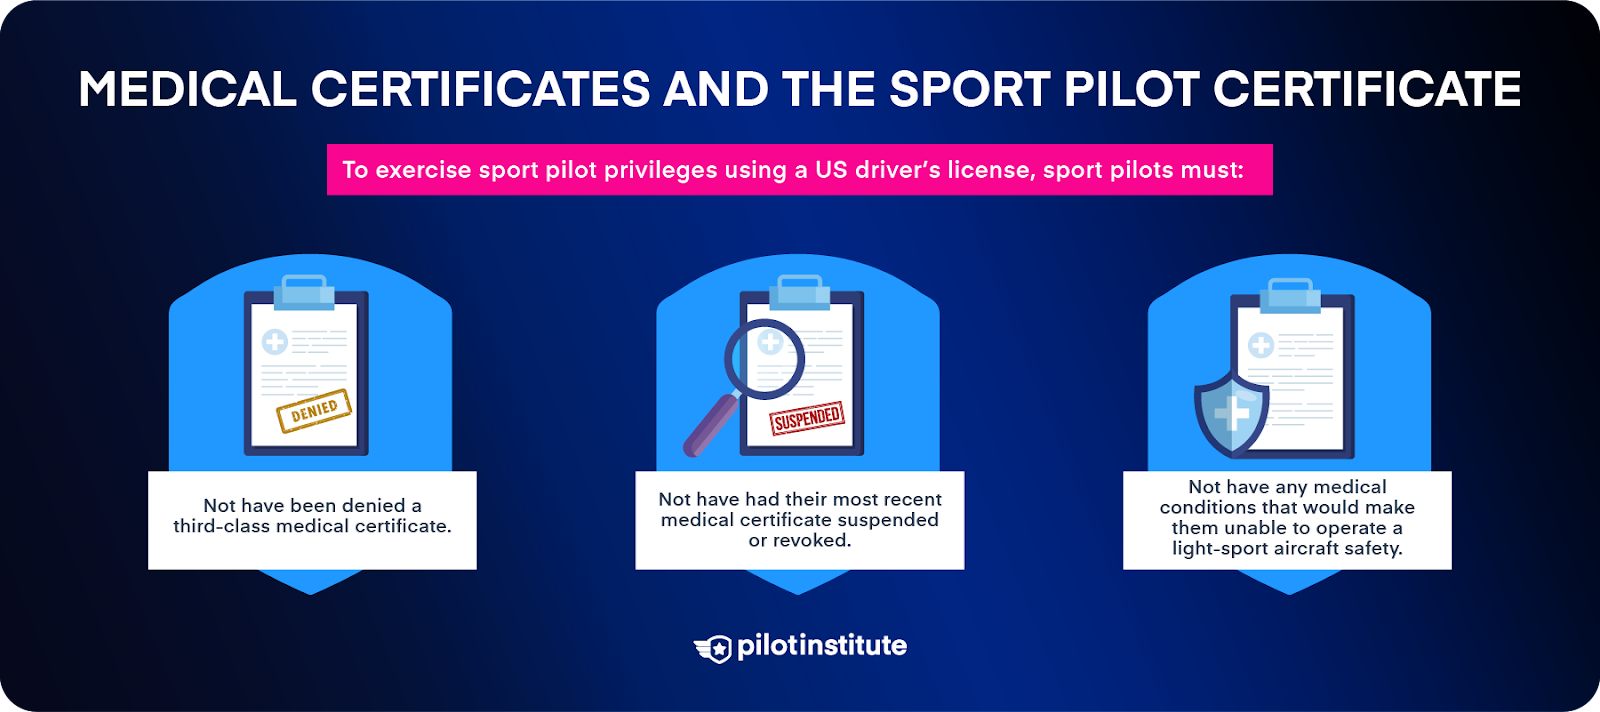 Medical Certificates and the Sport Pilot Certificate infographic. Depictions the requirements to exercise sport pilot privileges using a US driver's license.